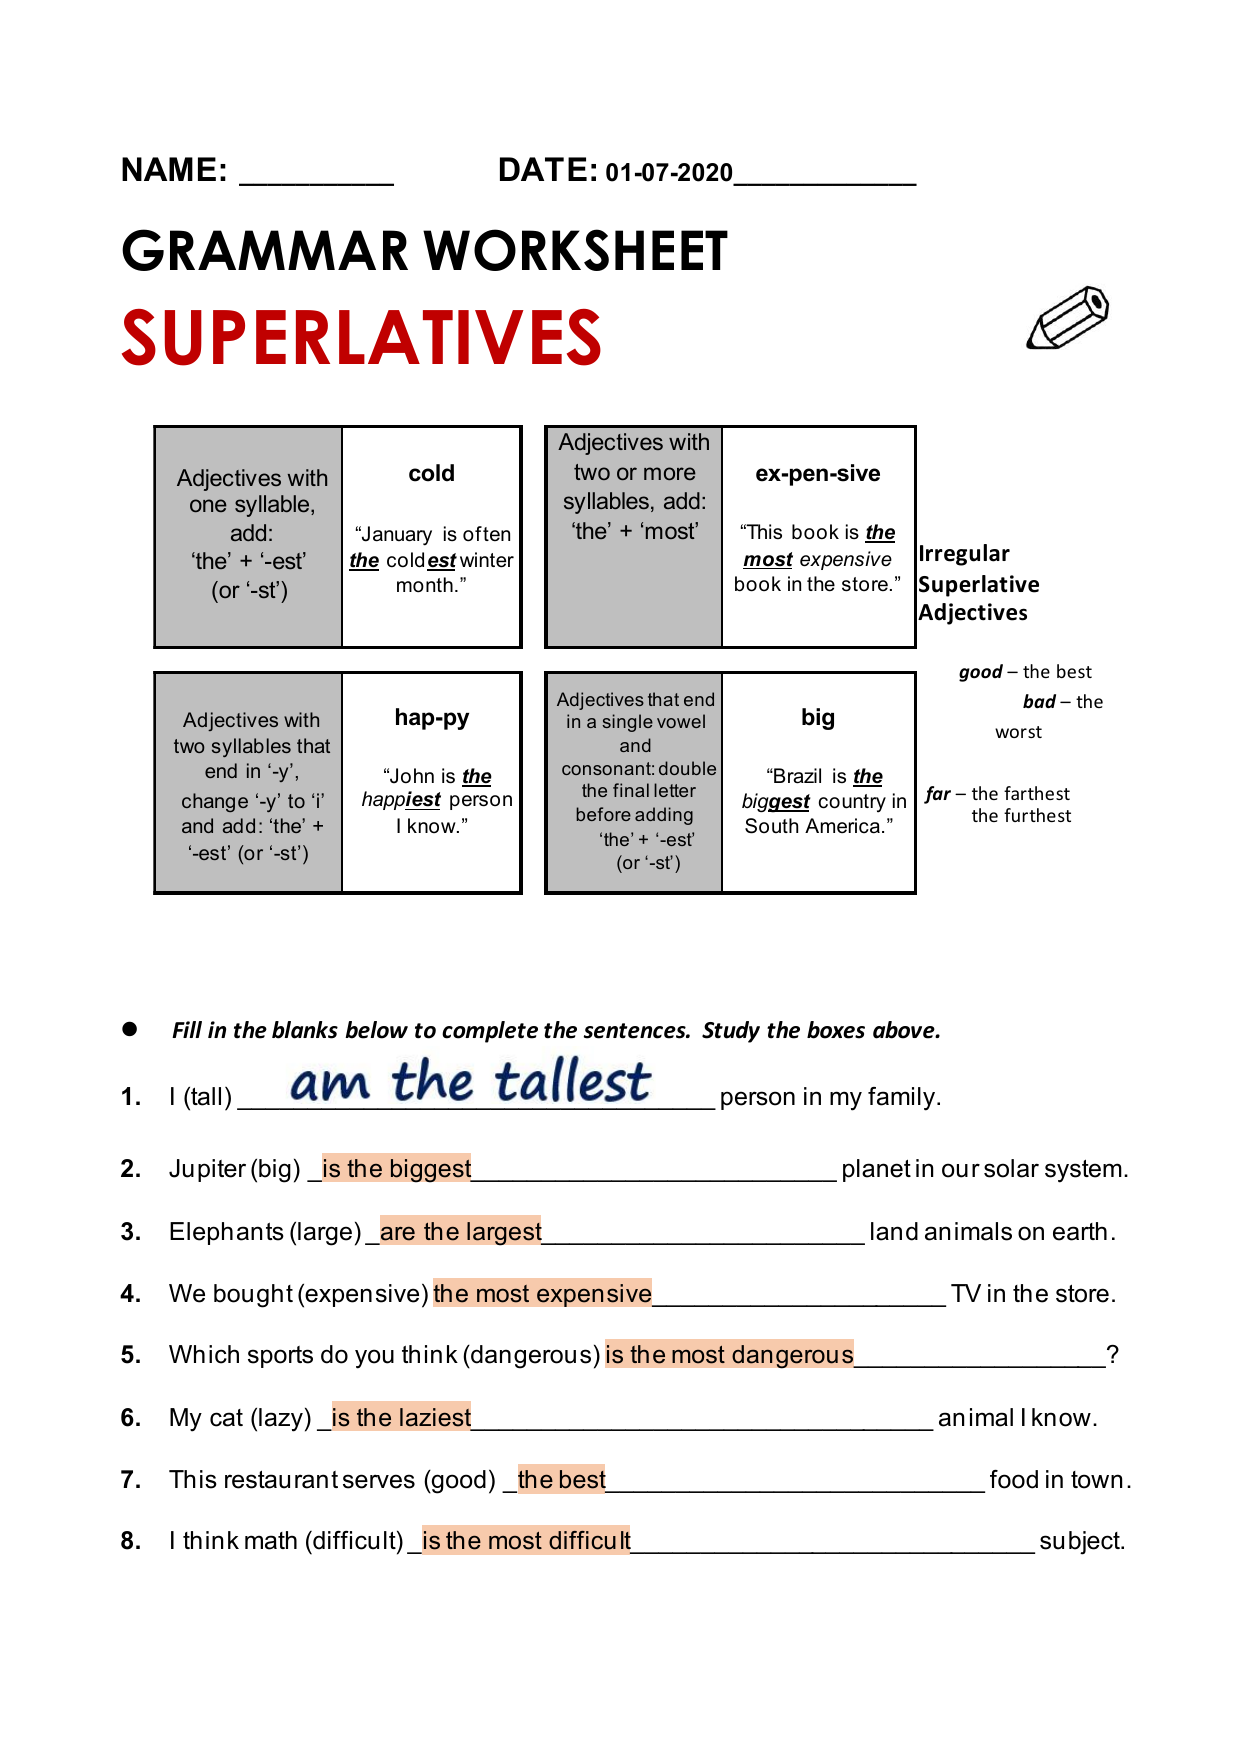 what is a superlative